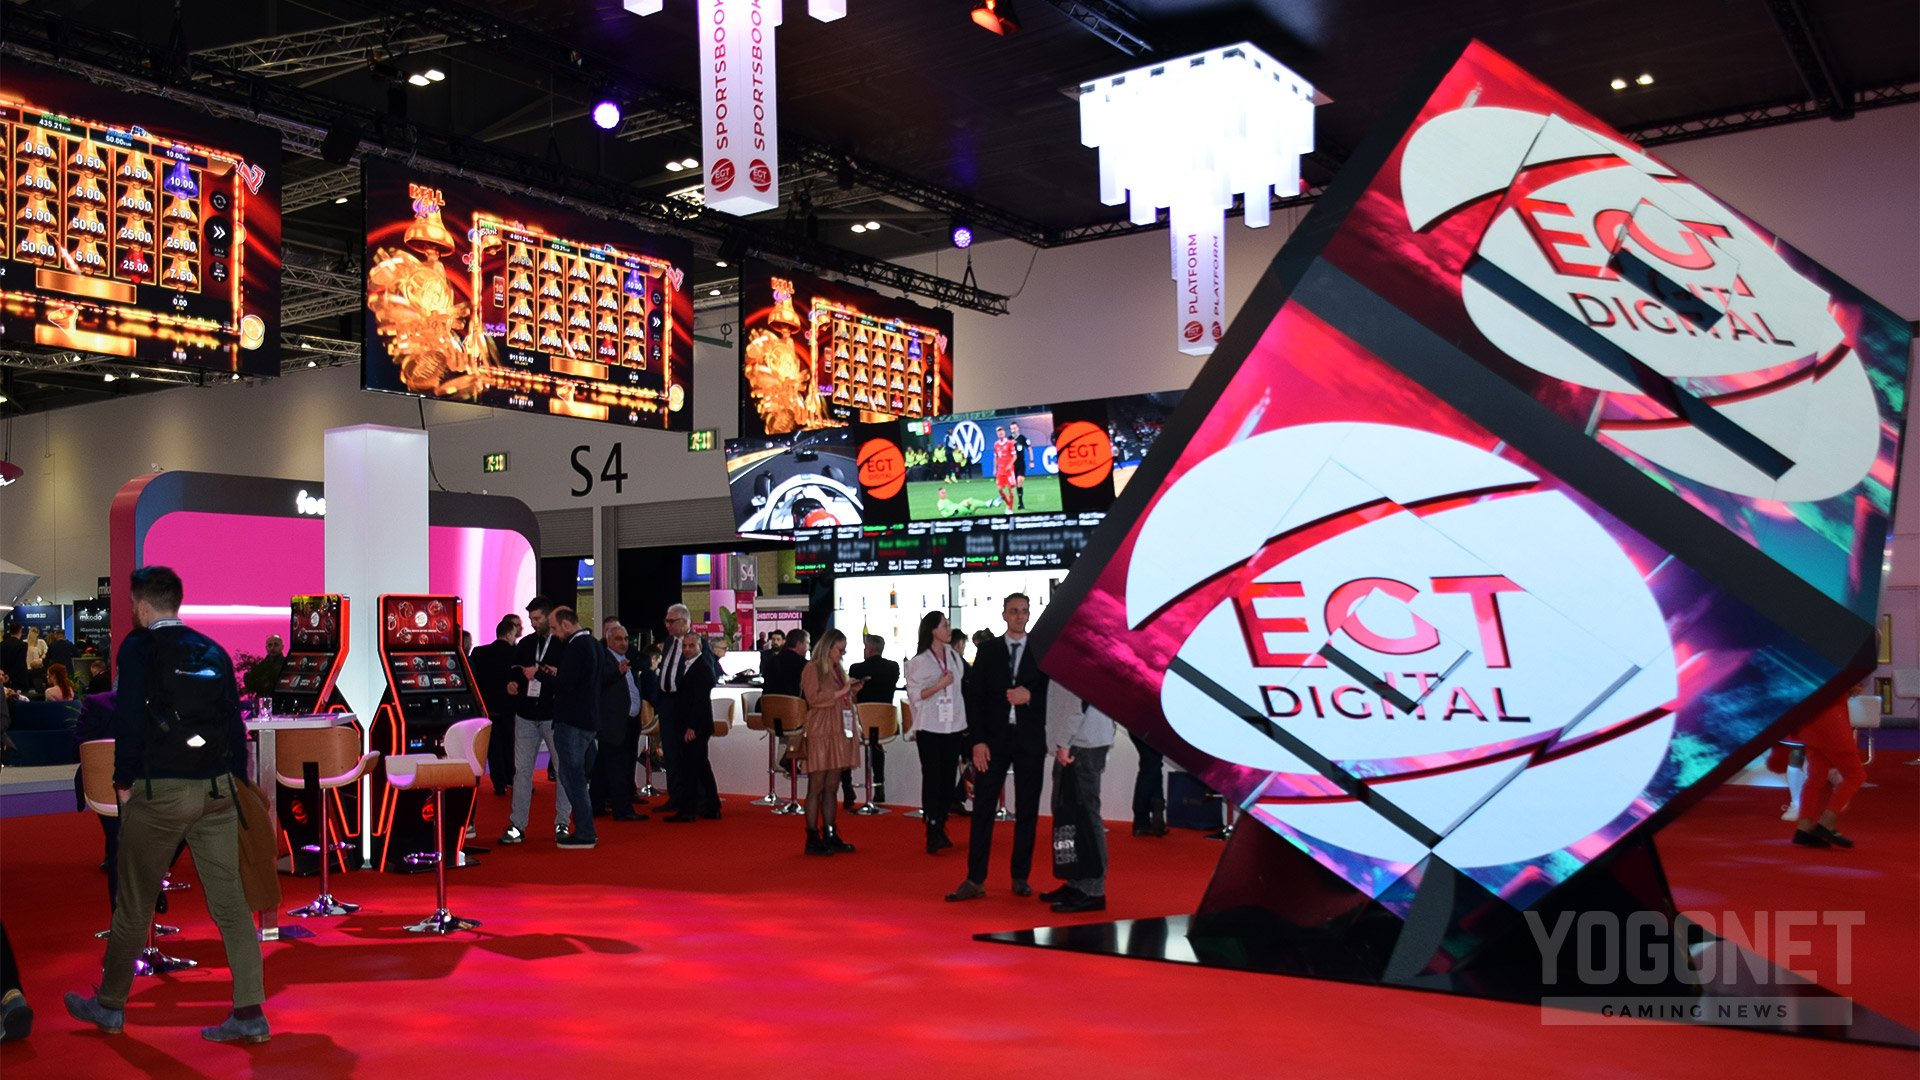 EGT to exhibit its latest technological advancements at Belgrade Future  Gaming